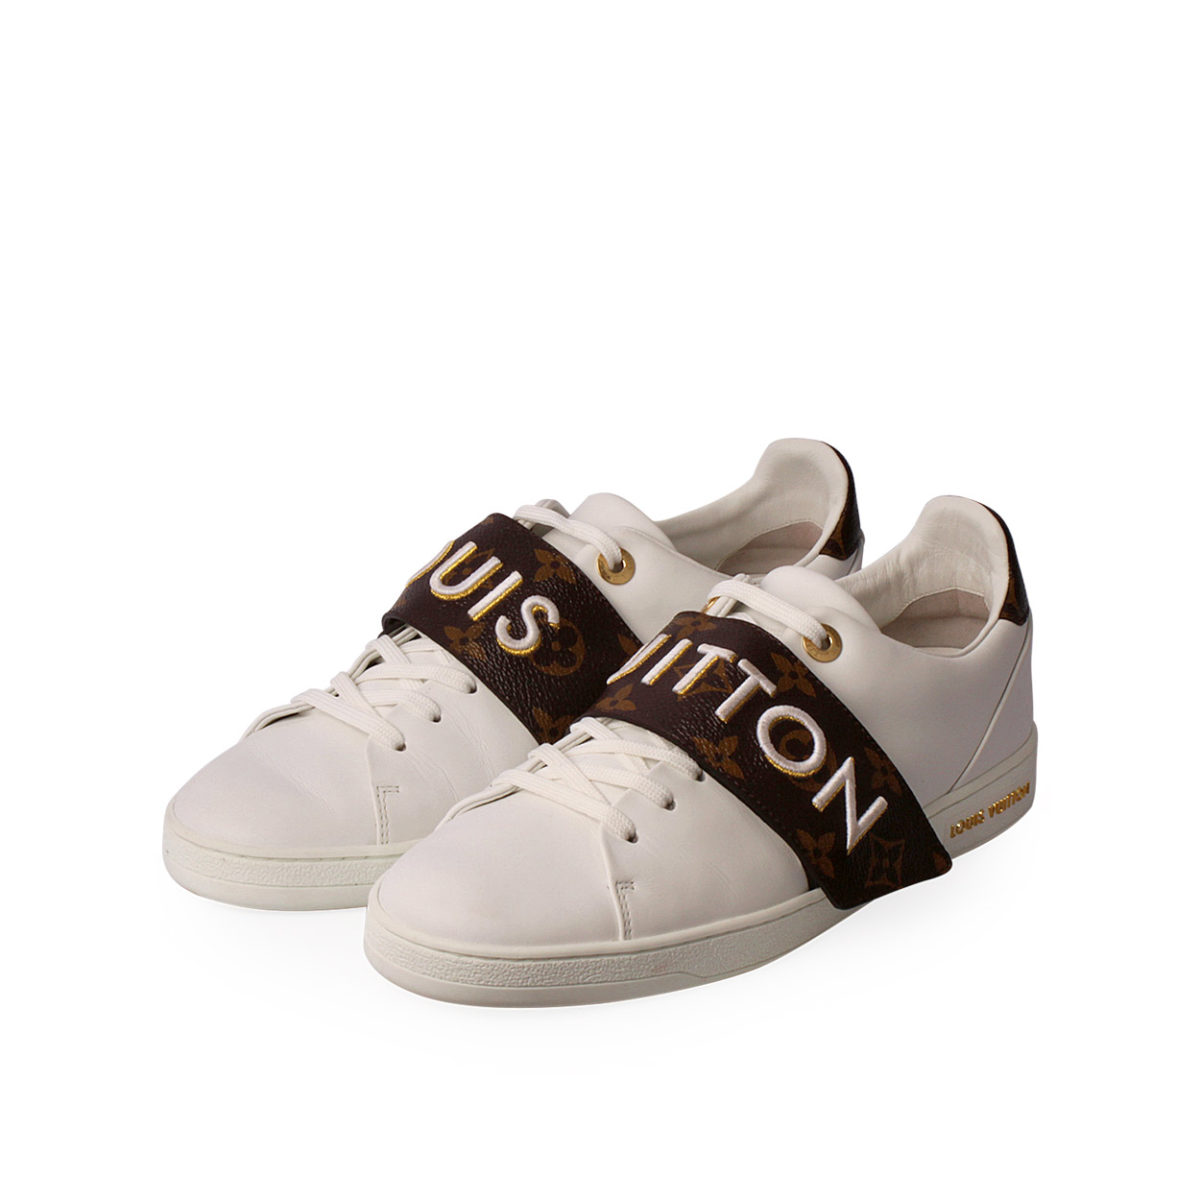 front row sneakers louis vuitton